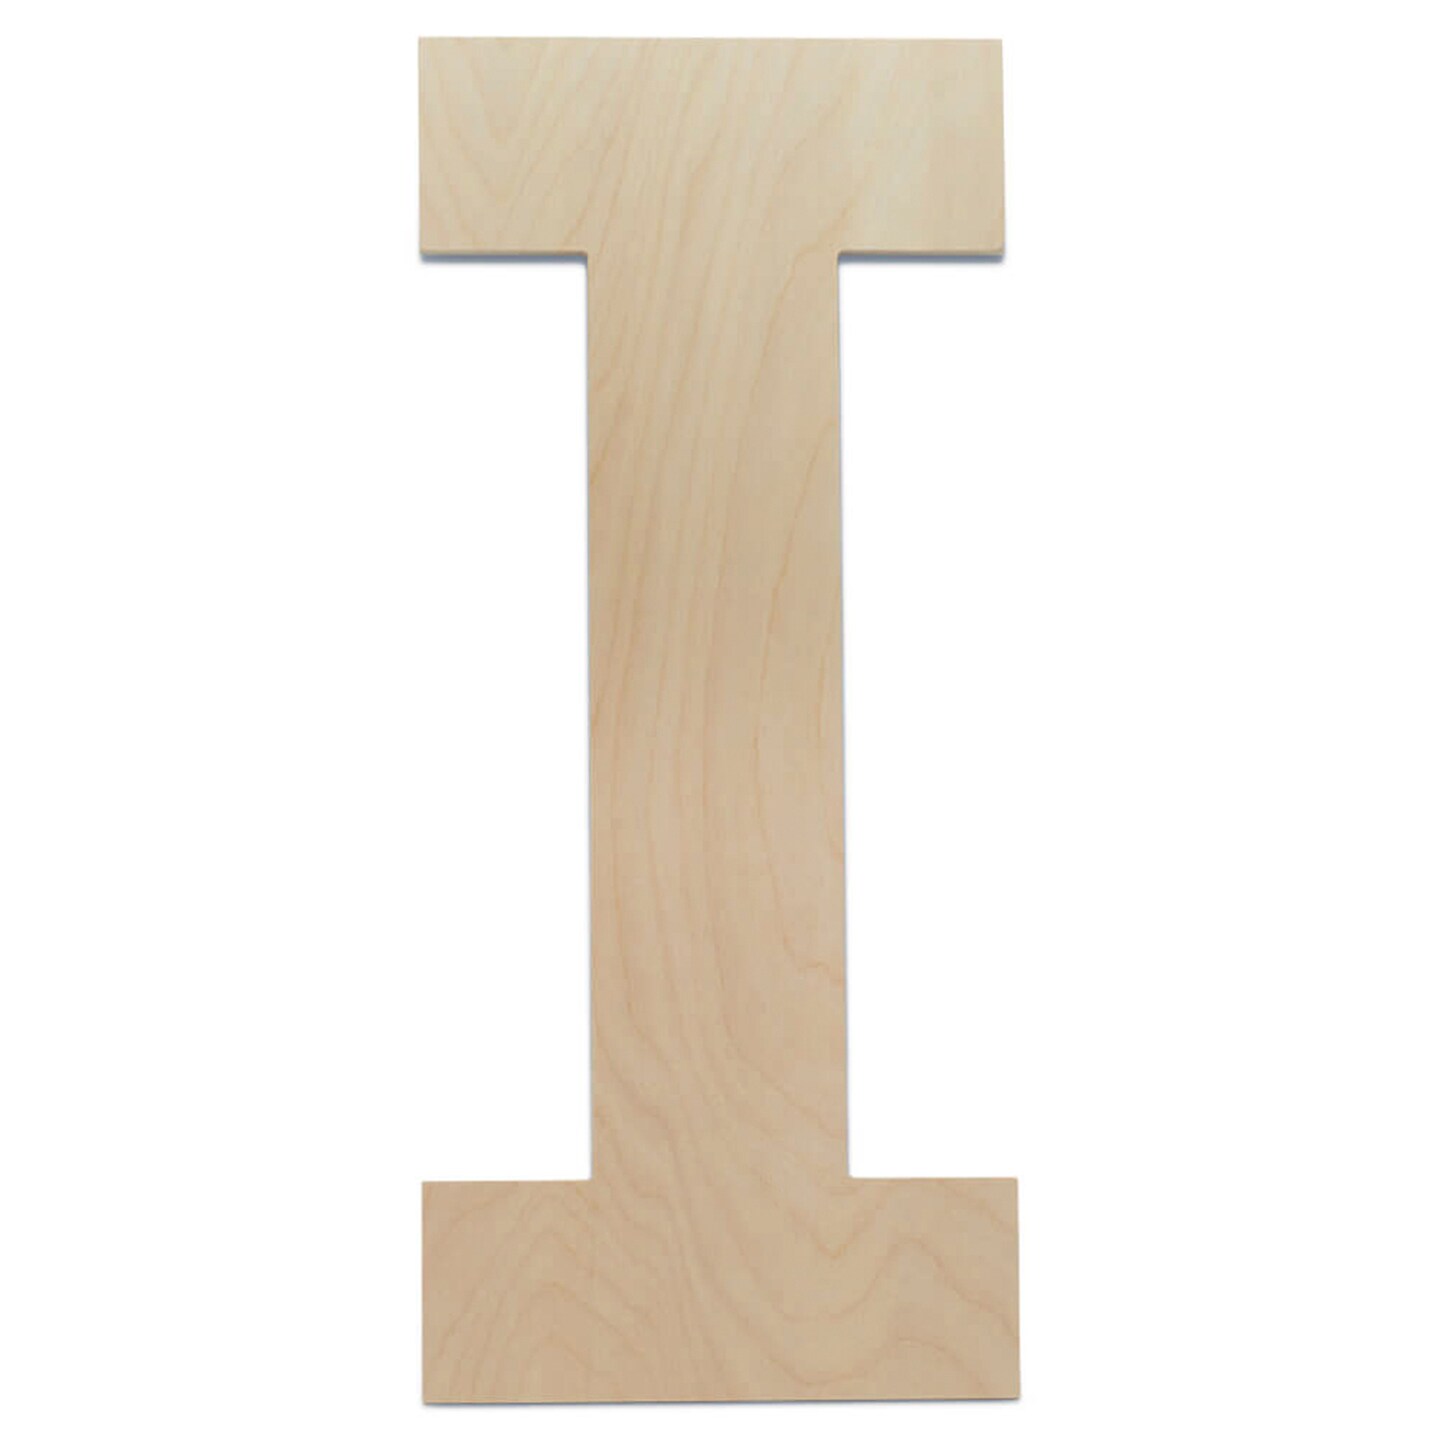 Decorative Wooden Letters & Numbers